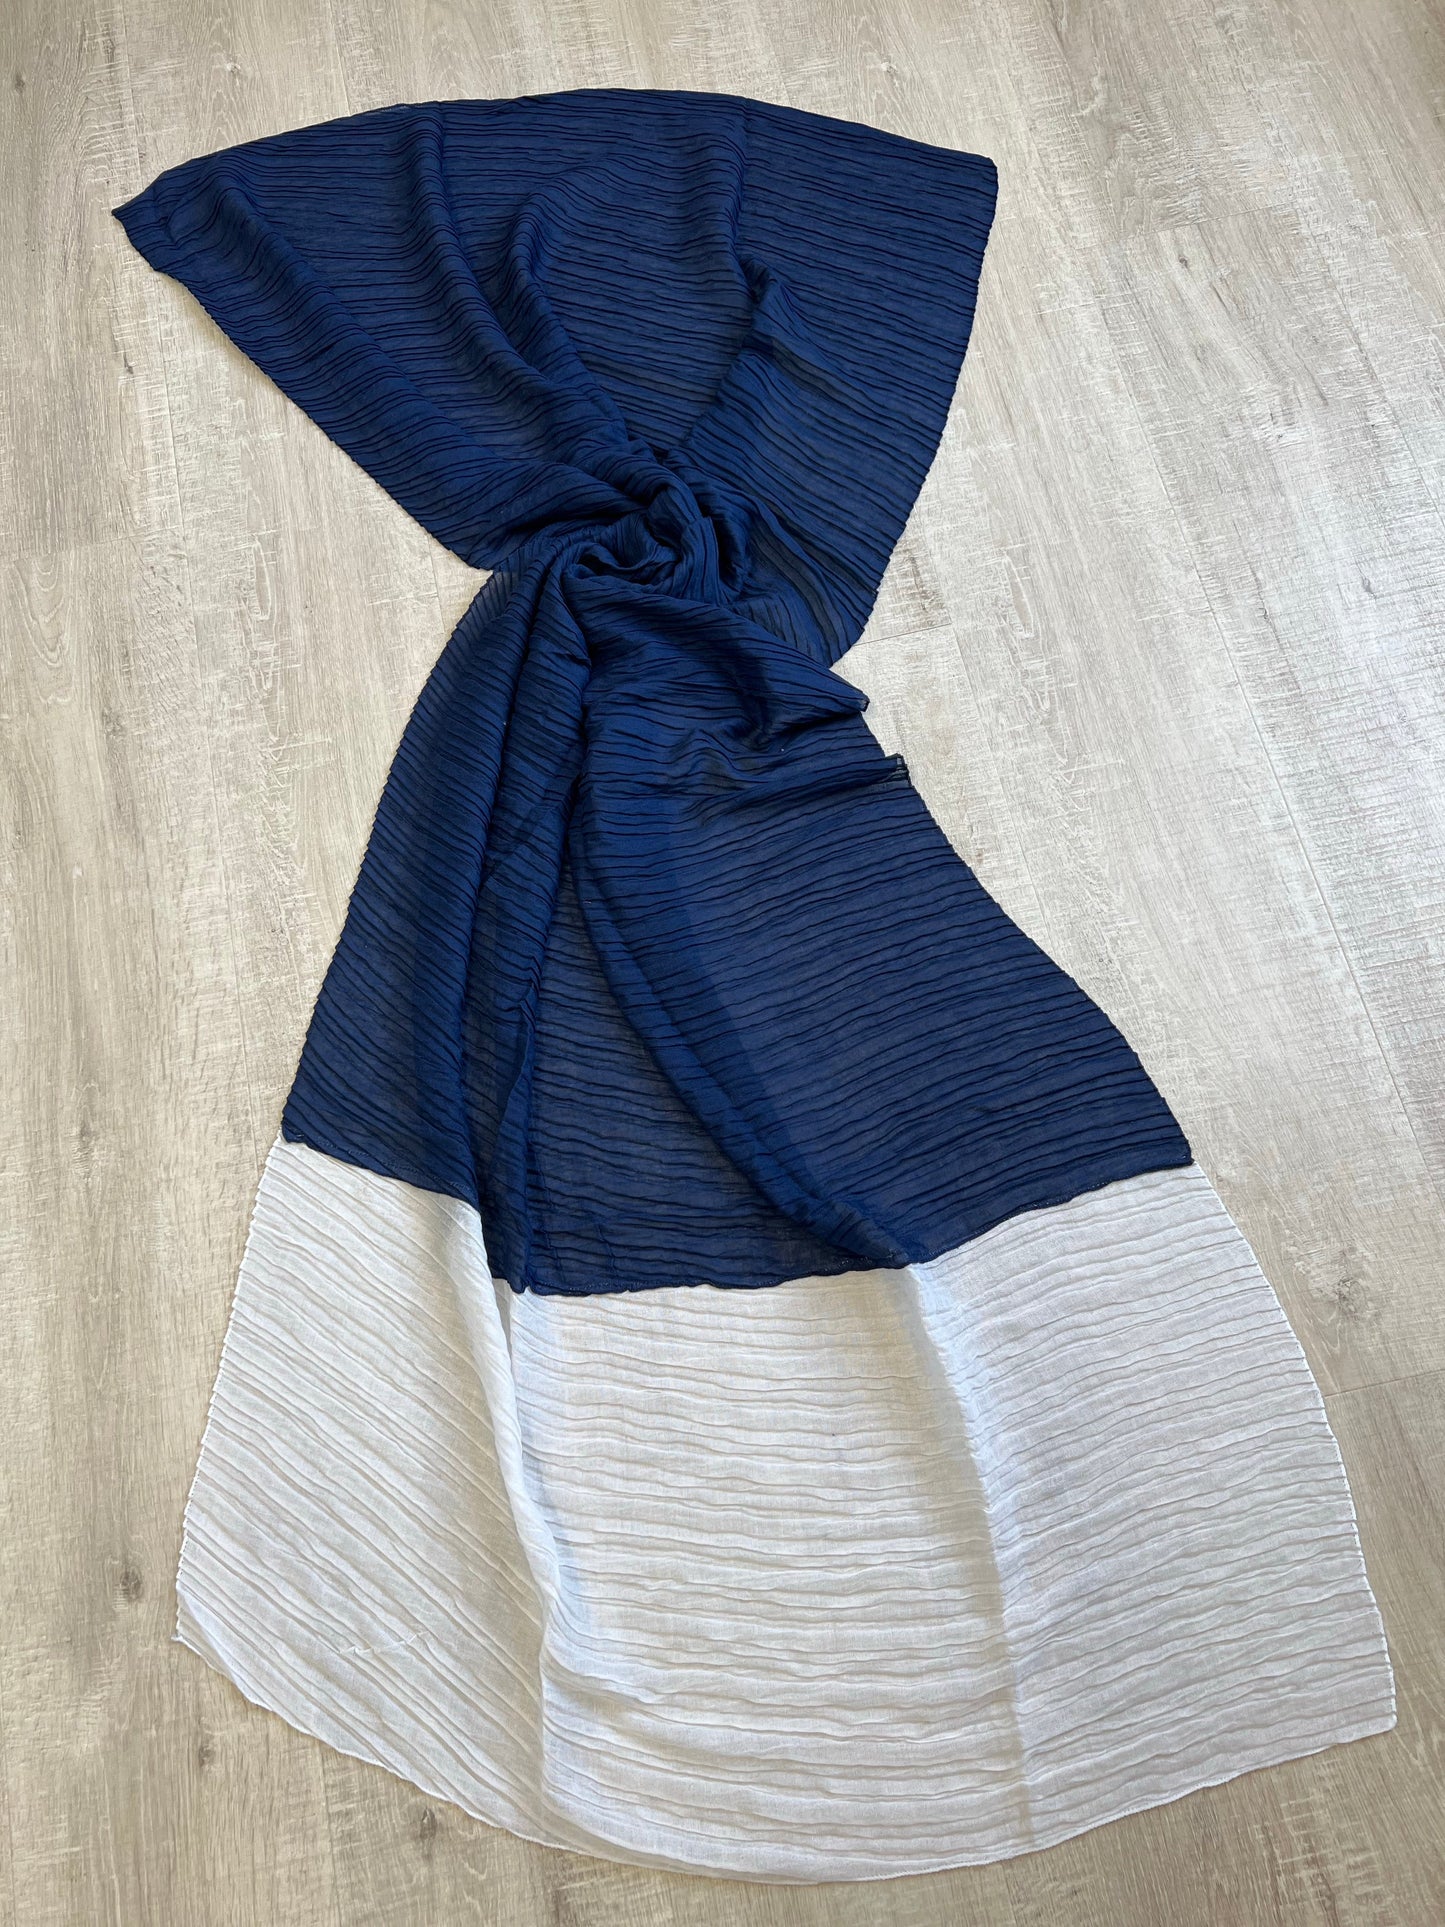 Navy and white pleated scarf